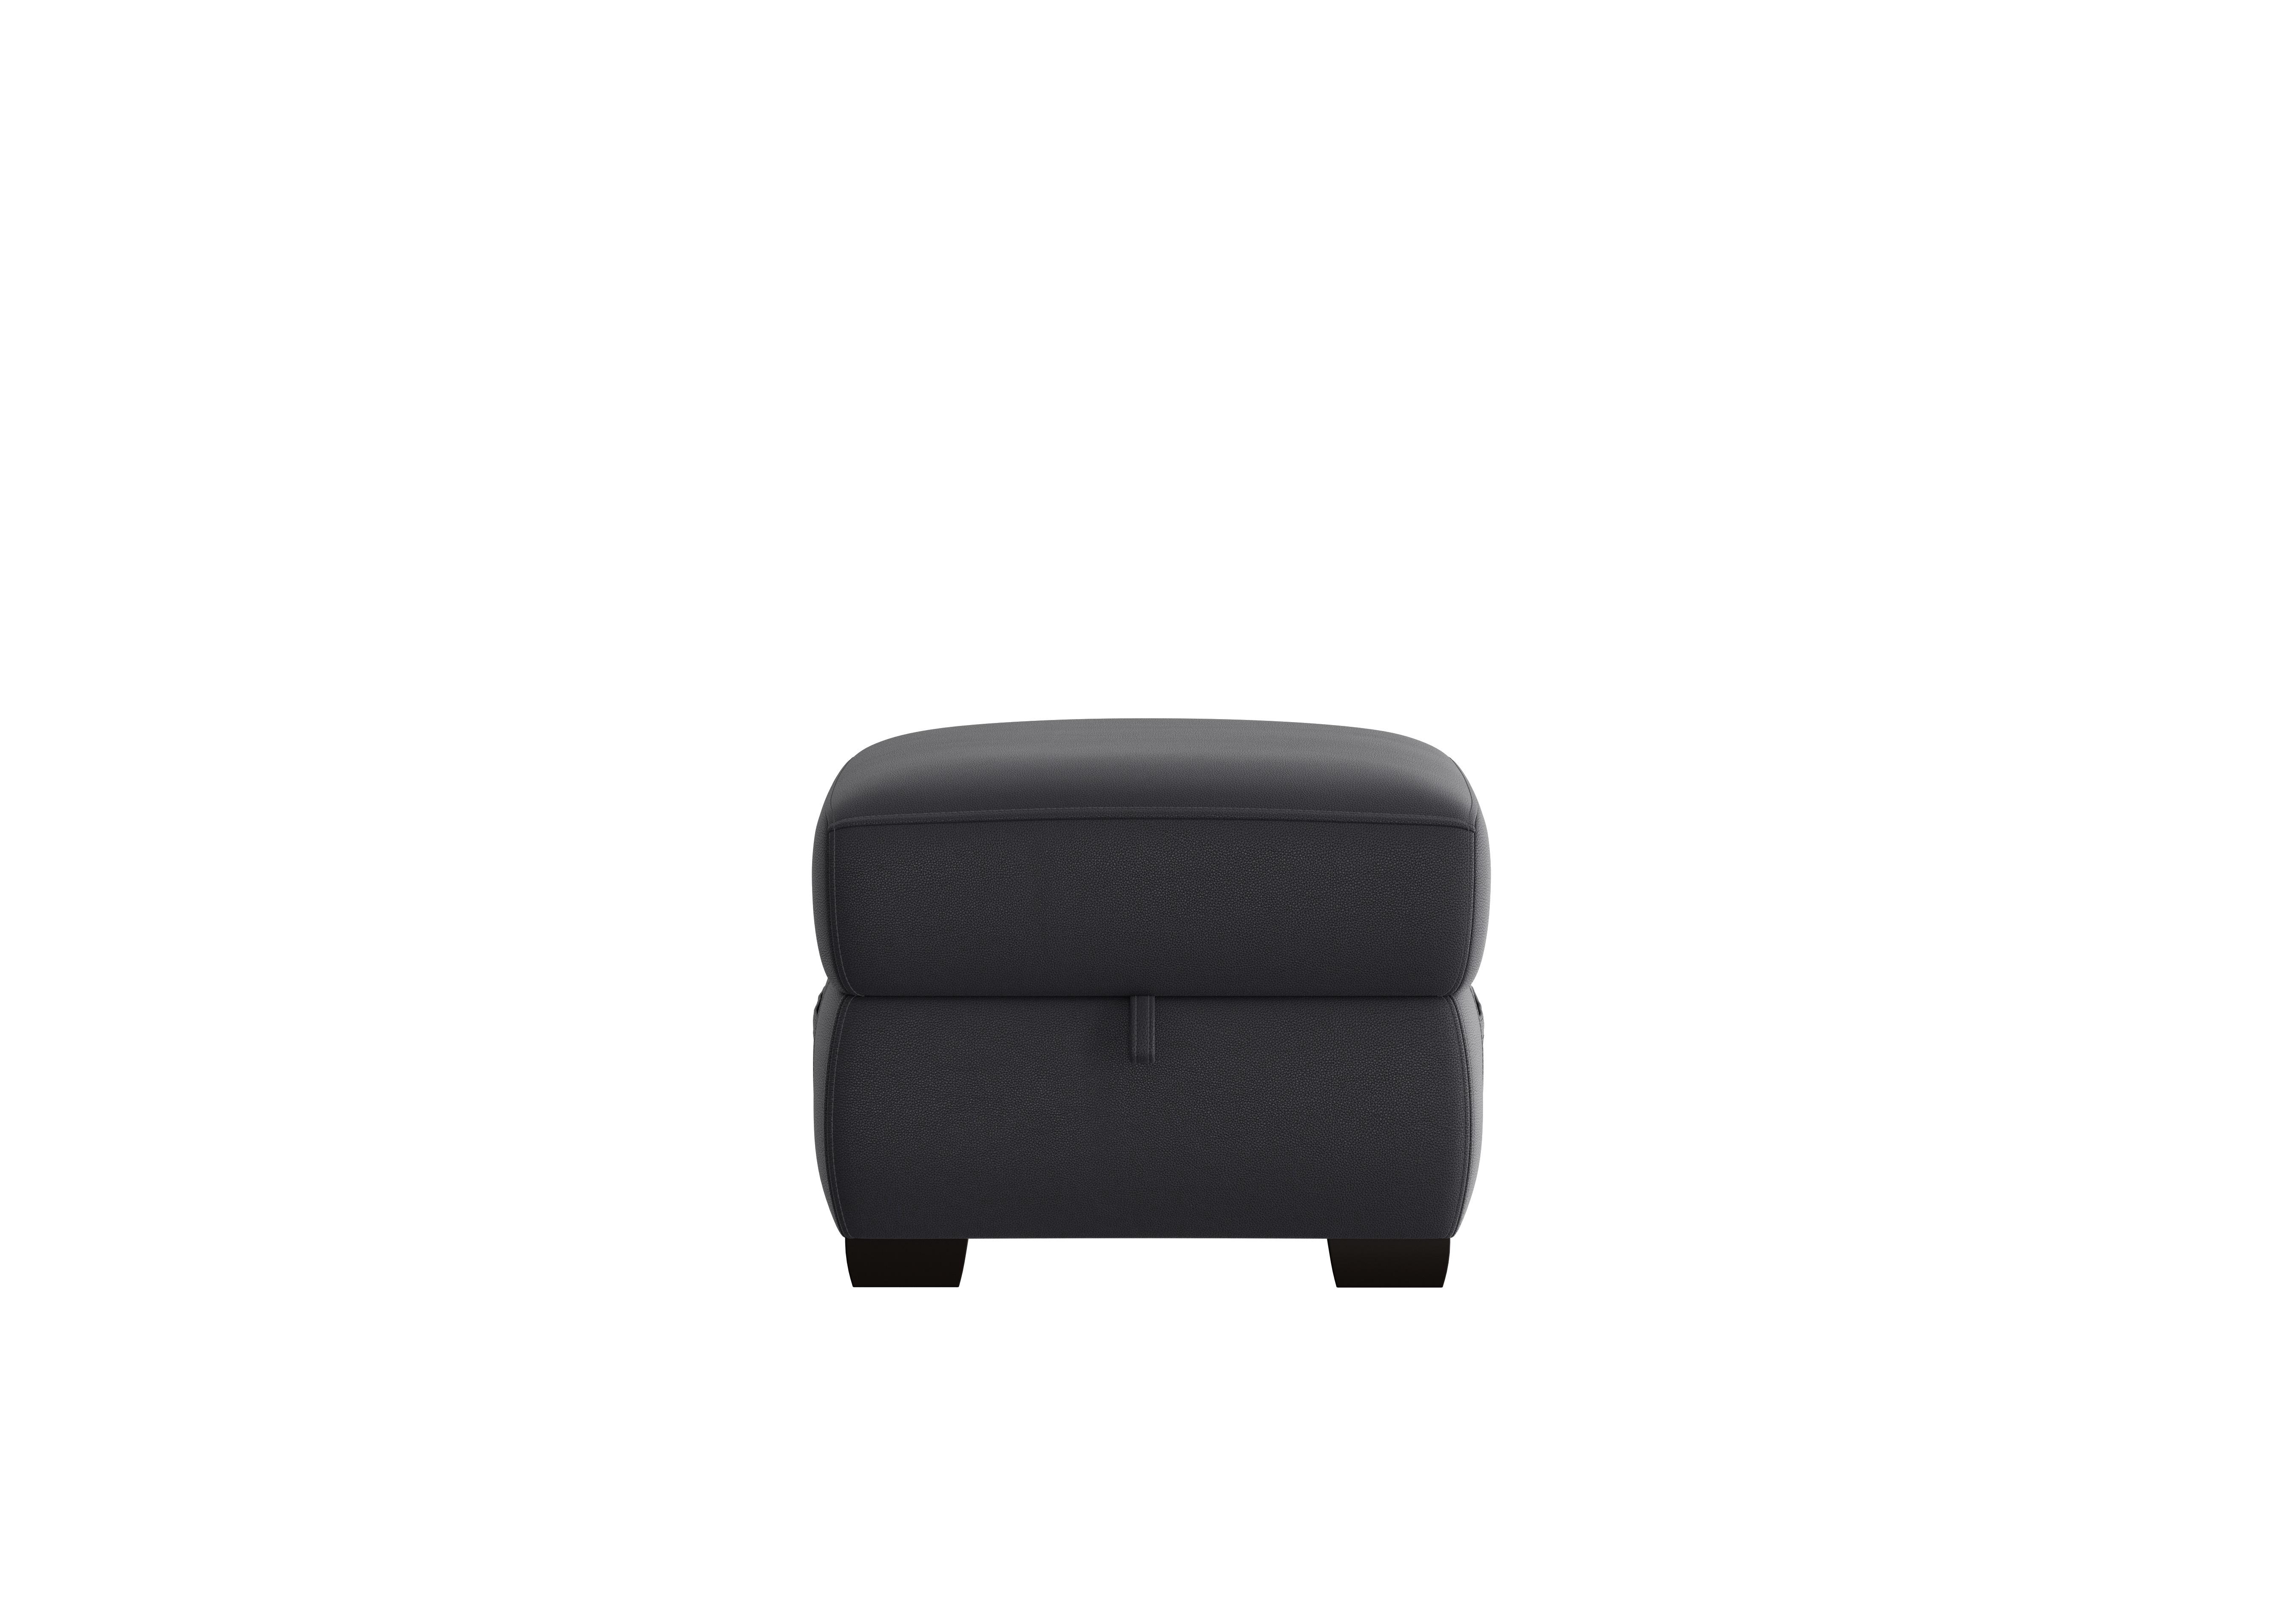 Starlight Express Leather Storage Footstool in Bv-3500 Classic Black on Furniture Village